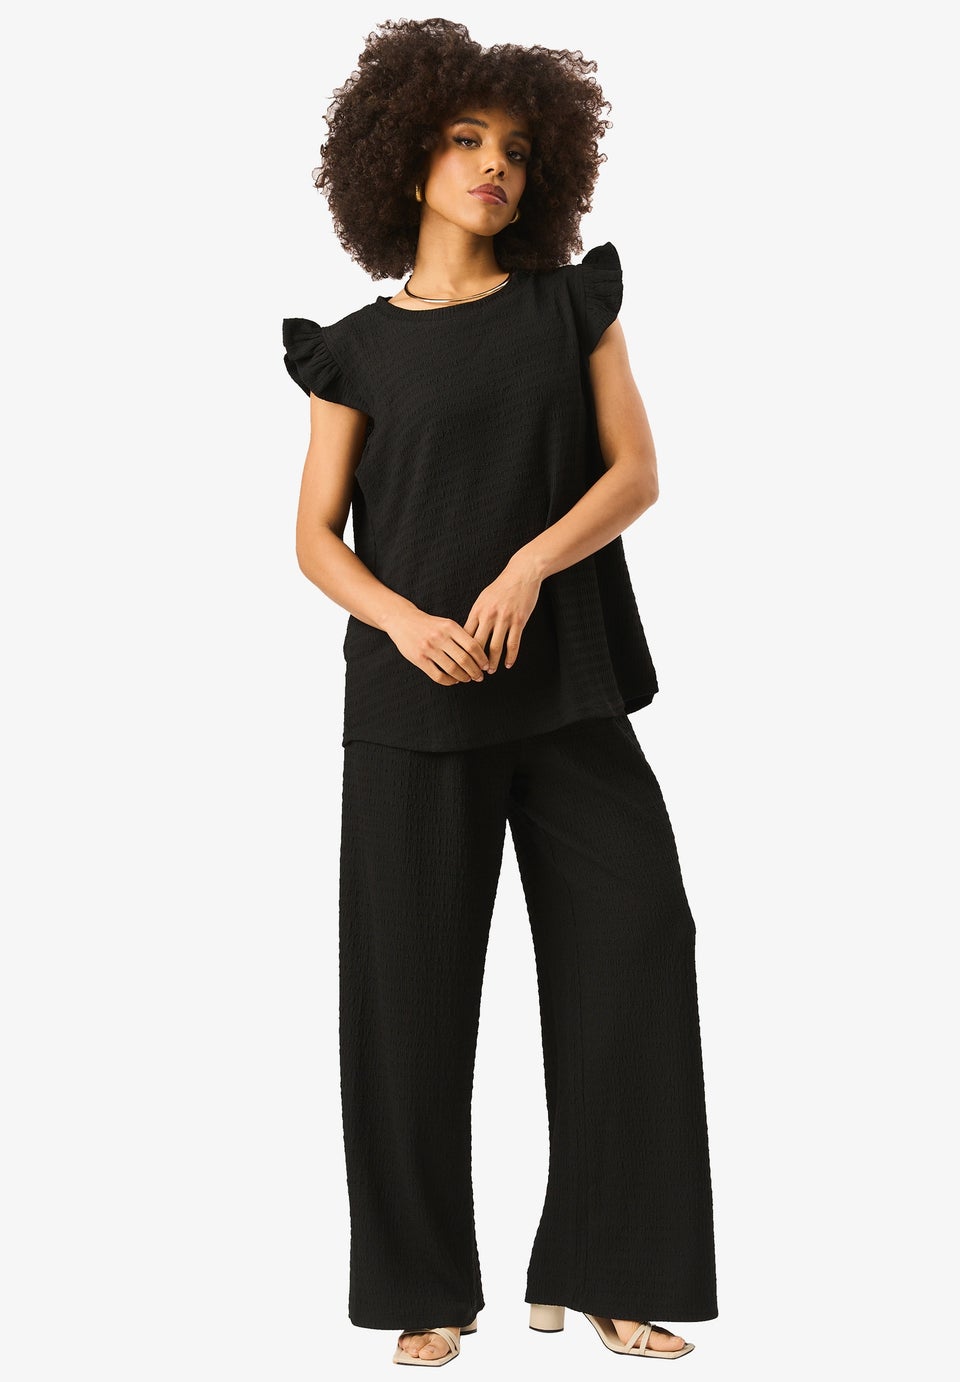 Gini London Black Frill Sleeves Textured Oversized Top